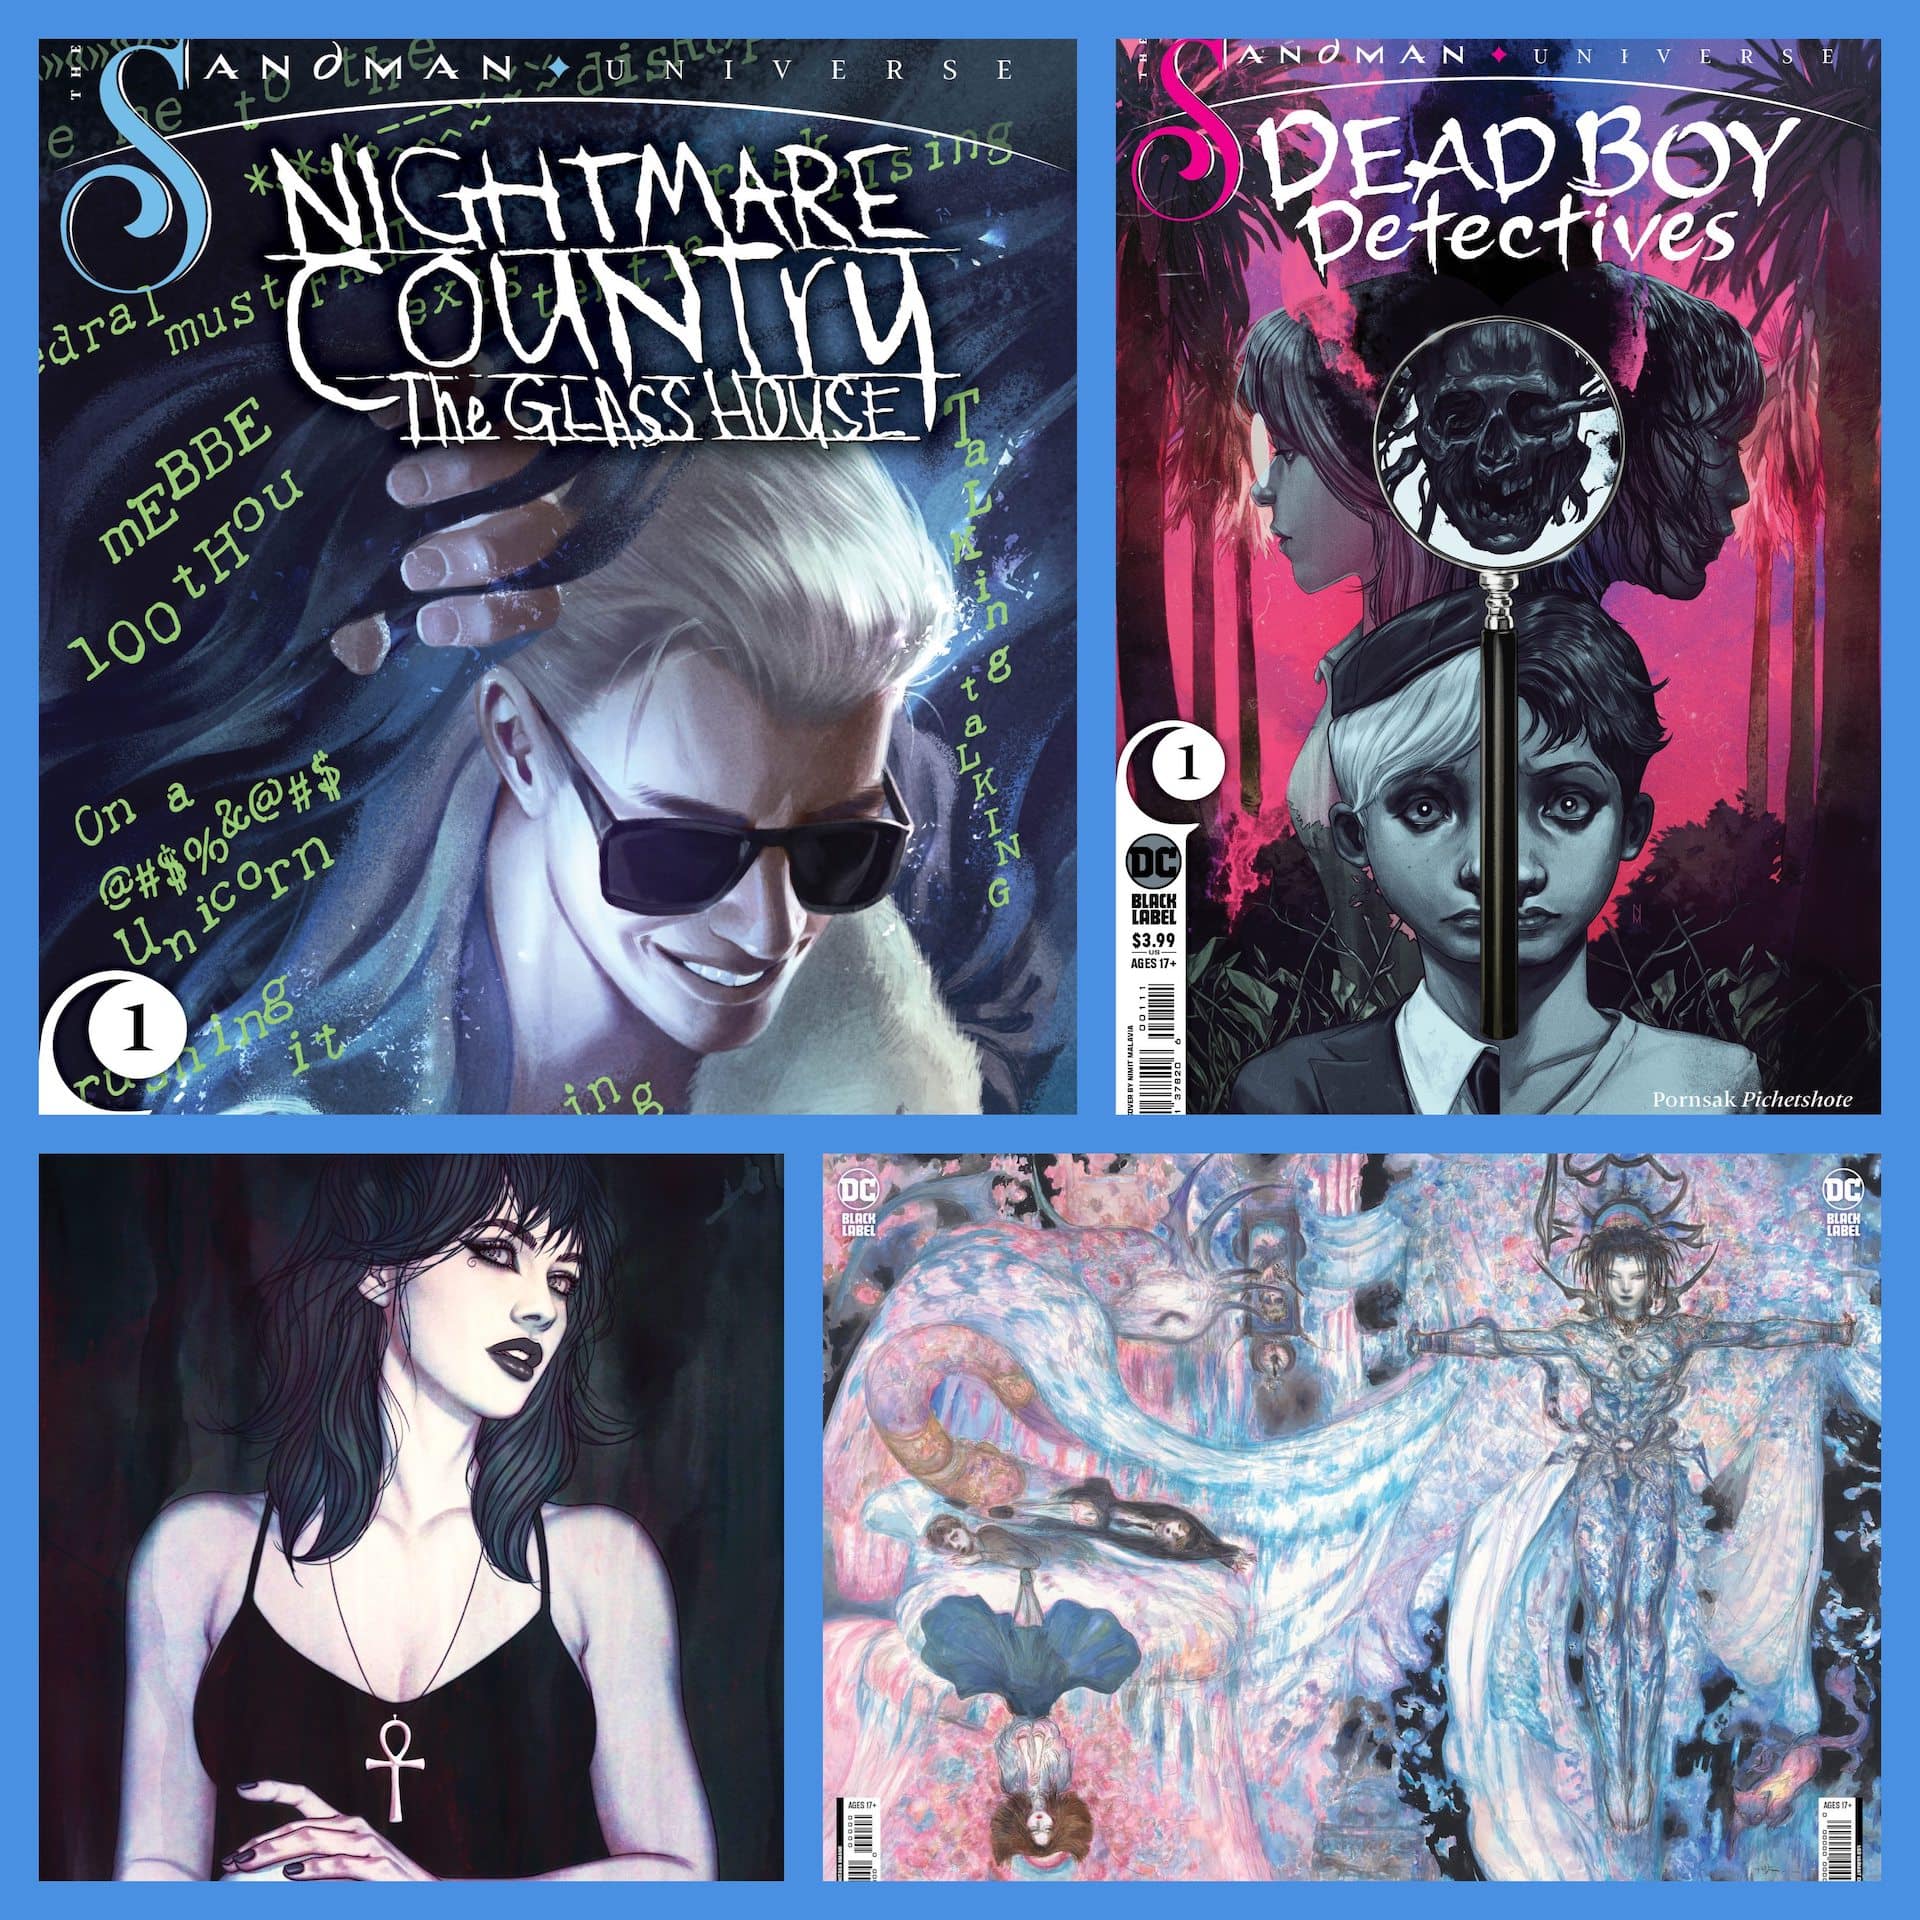 DC expands 'The Sandman Universe' with new 'Nightmare Country: The Glass House' and more